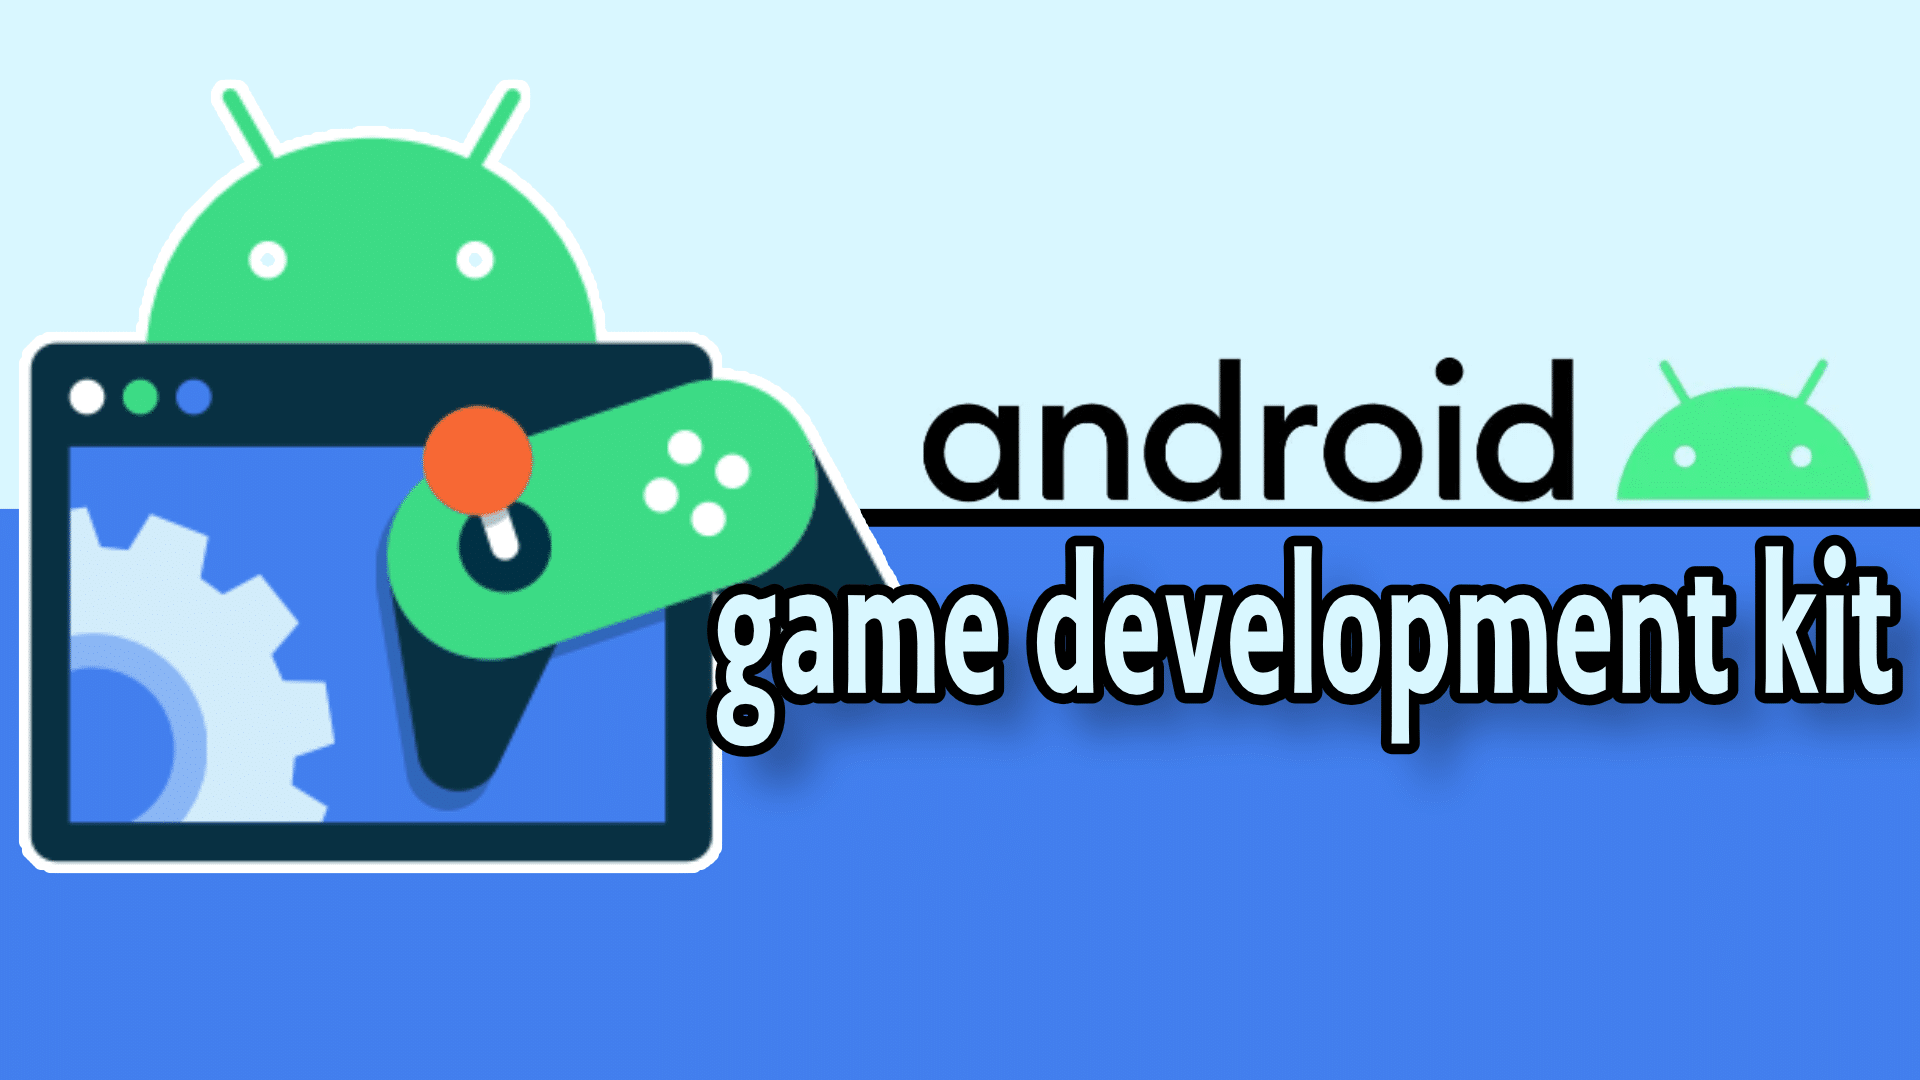 GameActivity, Android game development